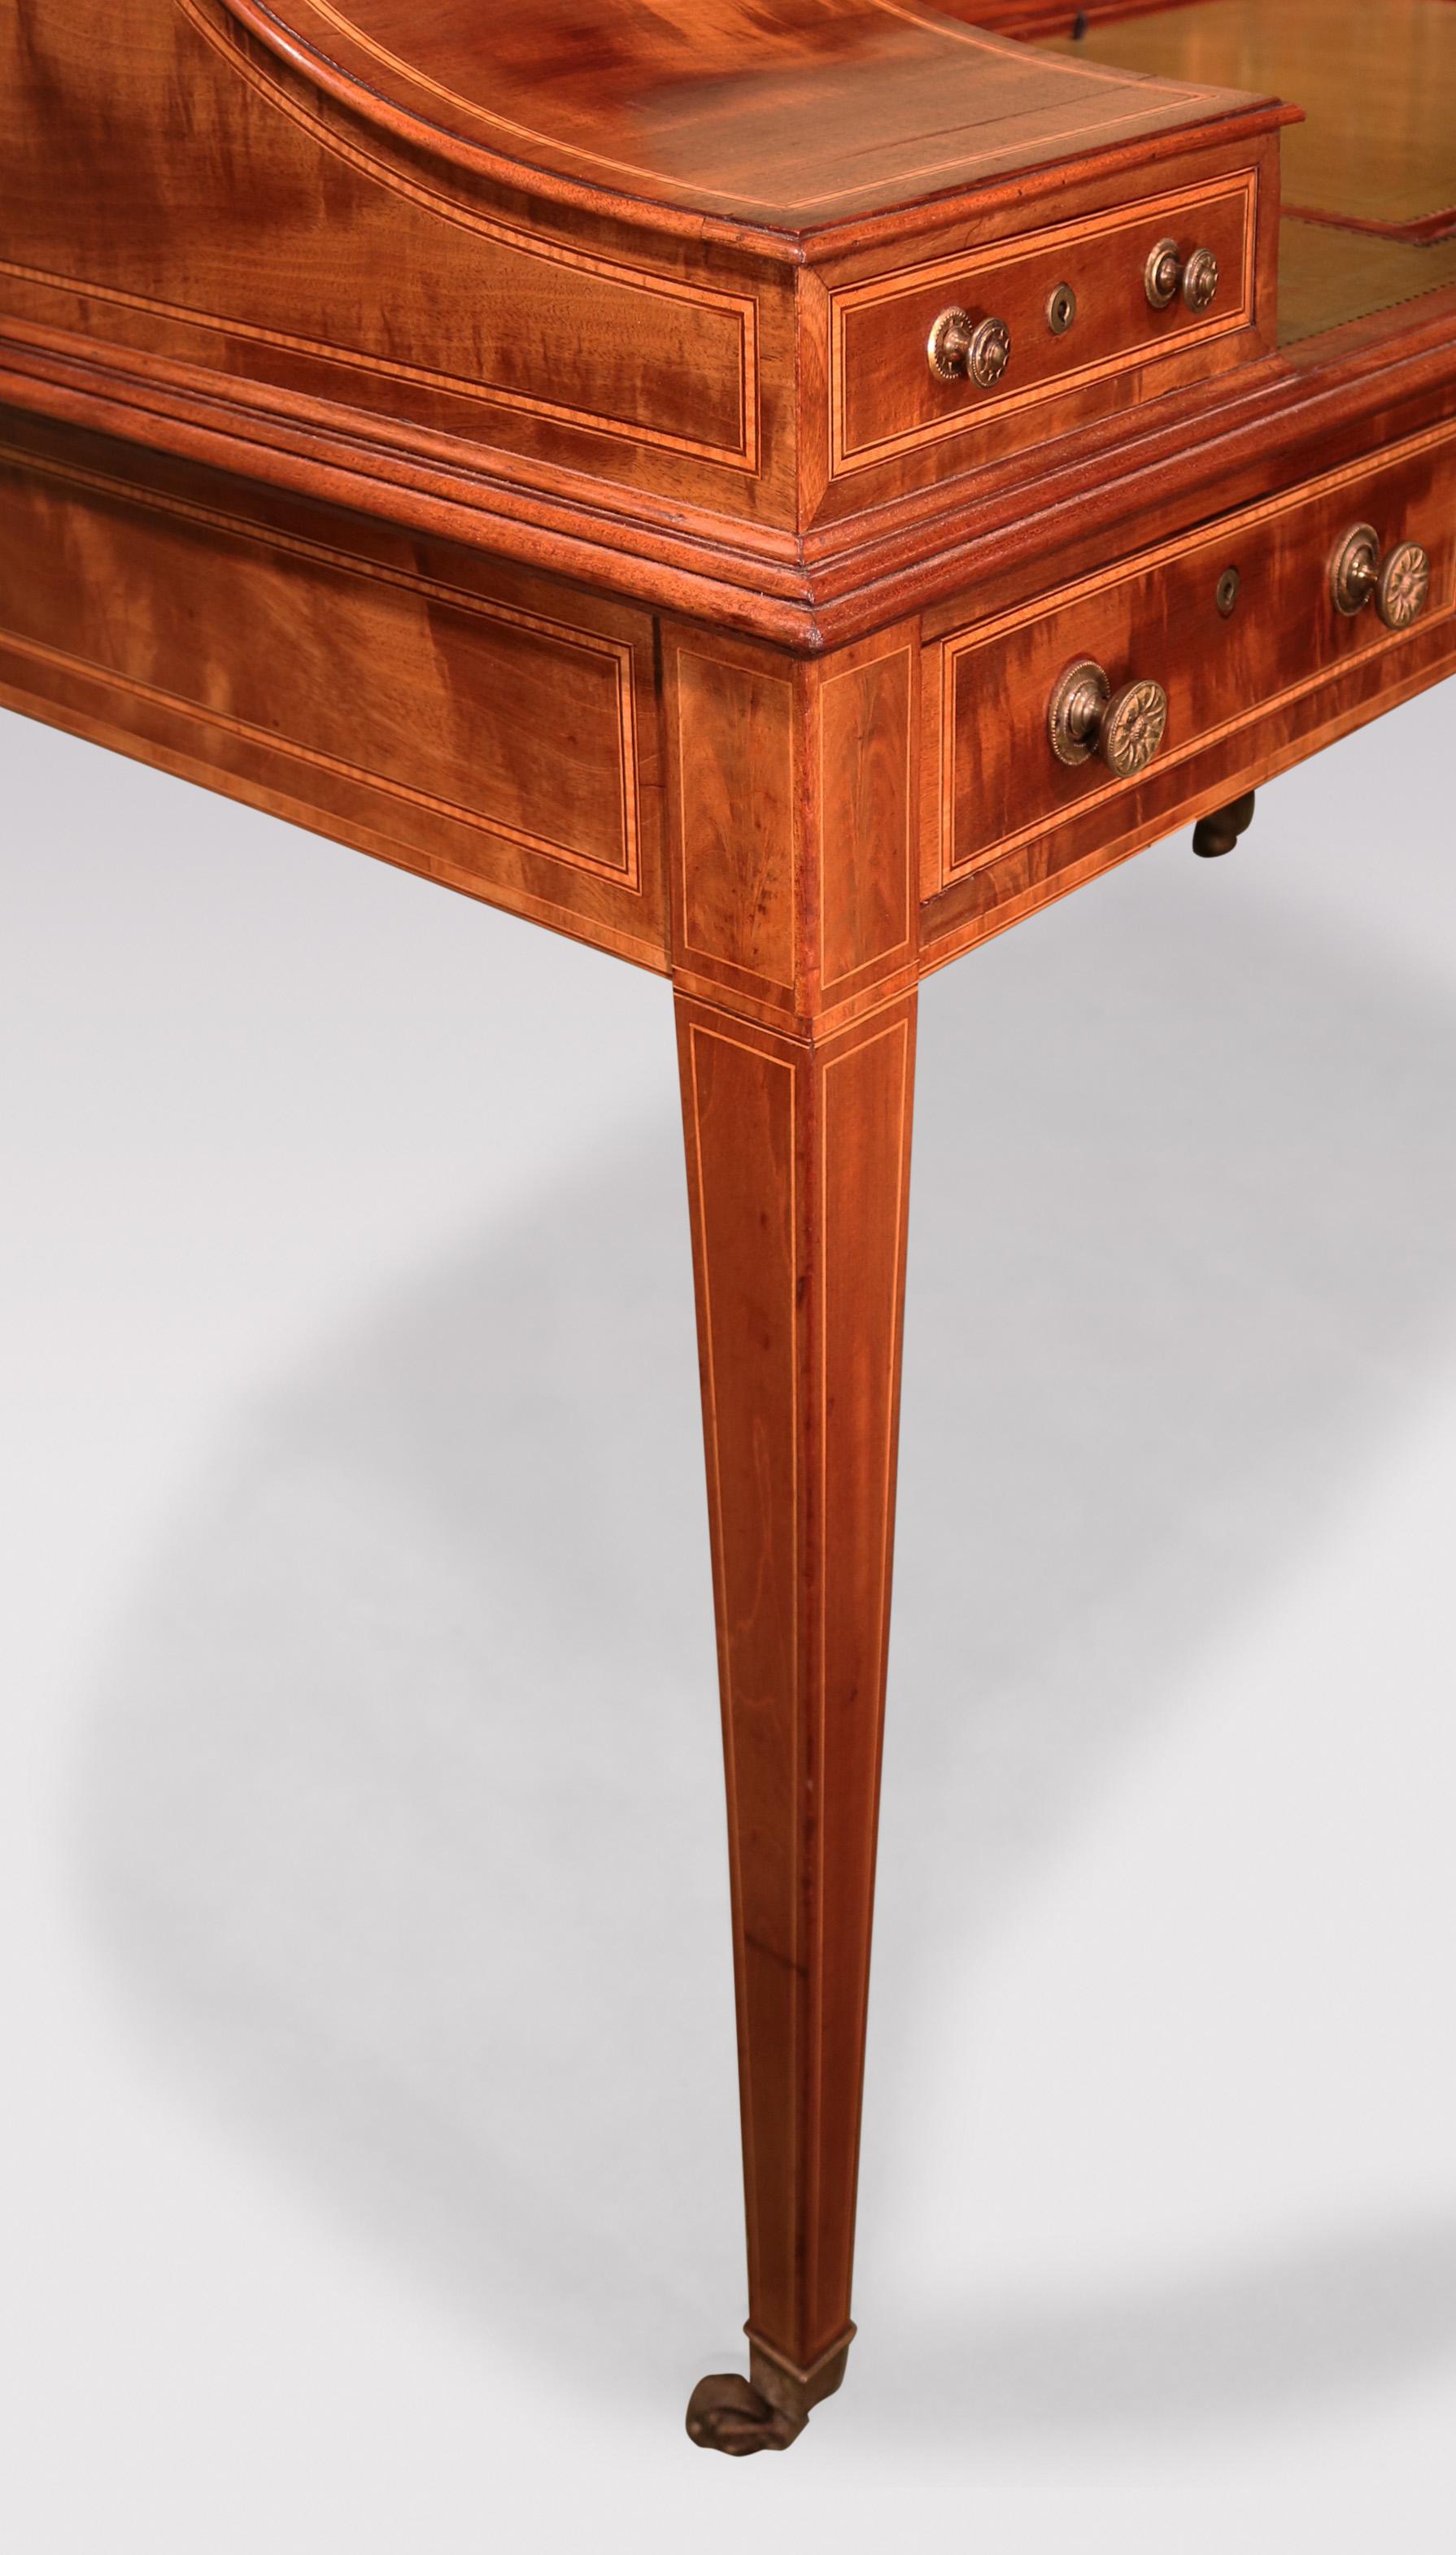 George III Mahogany Carlton House Desk In Good Condition For Sale In London, GB